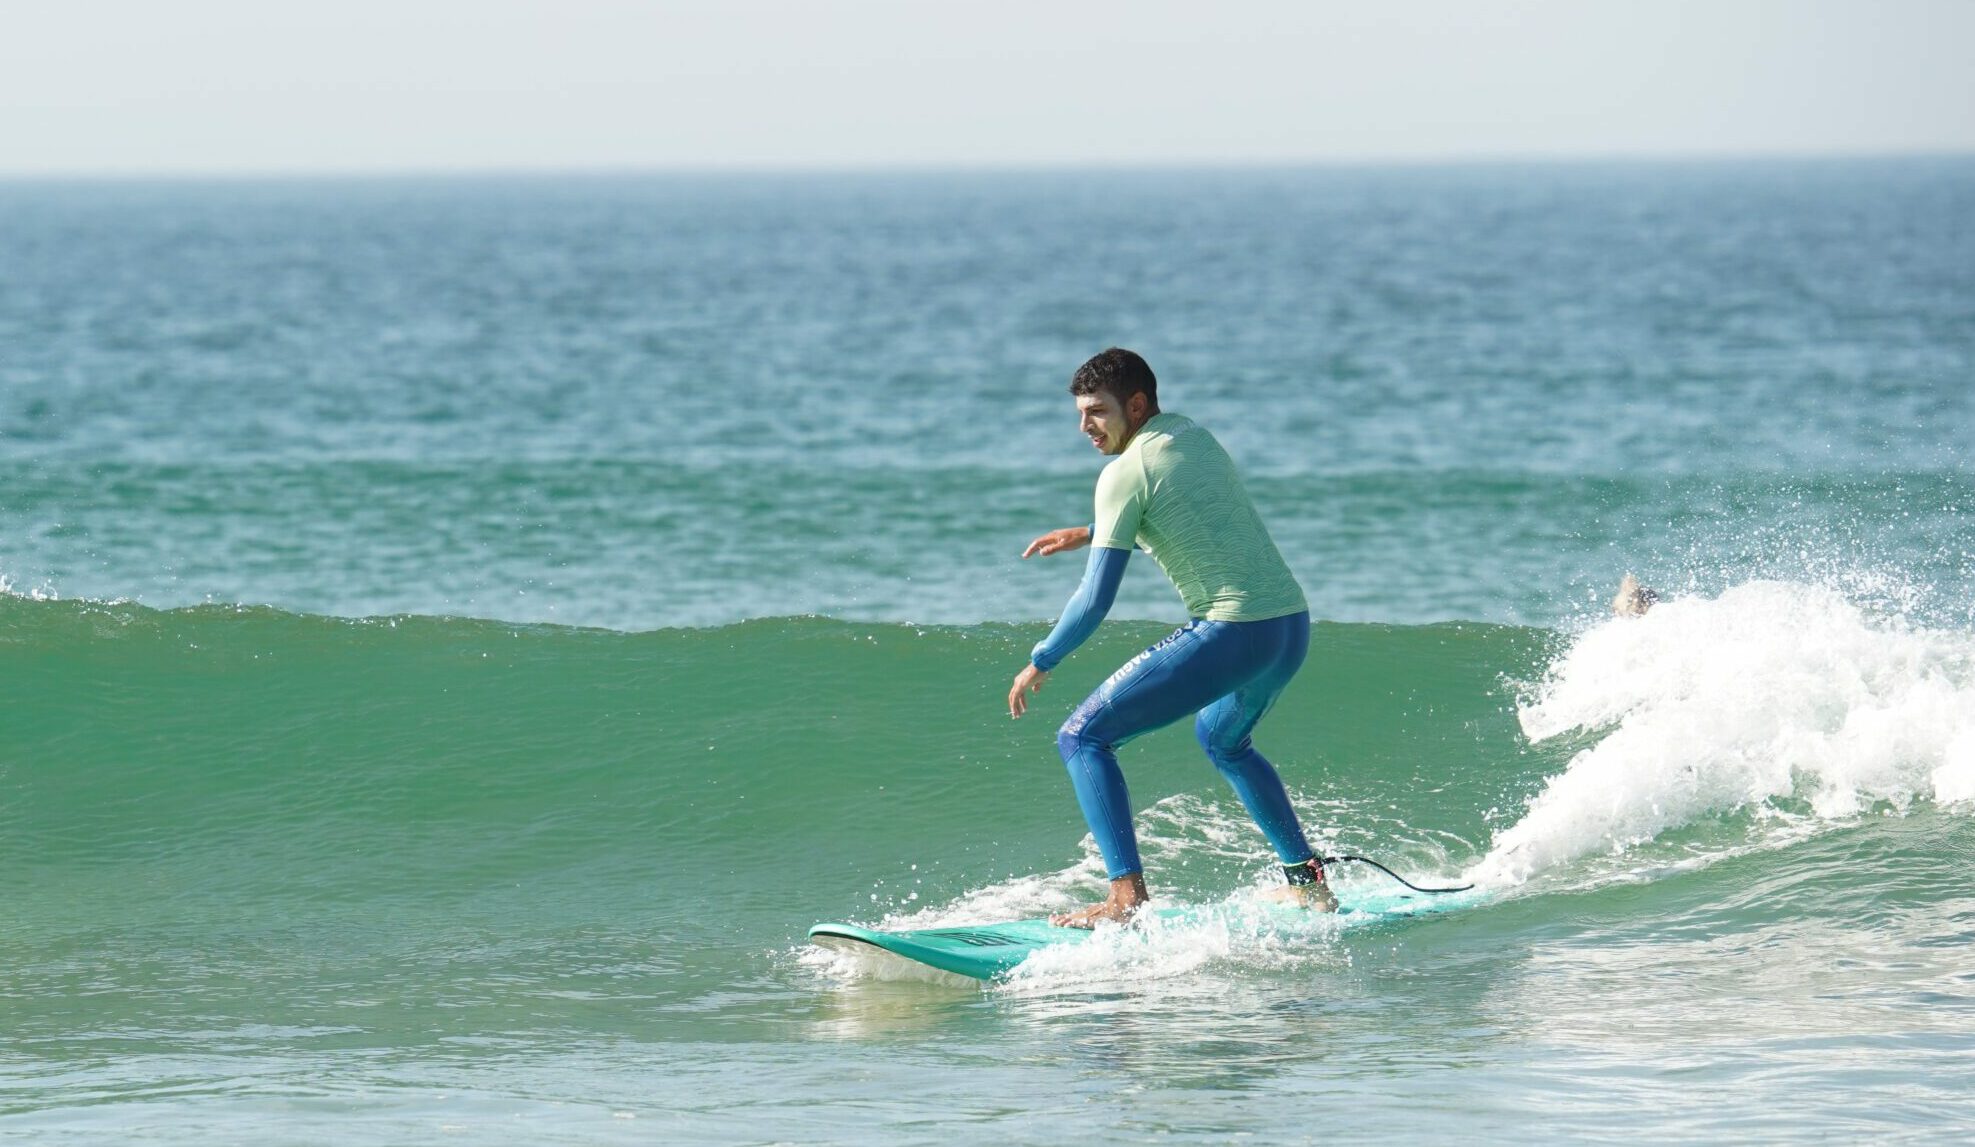 A guy on a surf board catching a wave